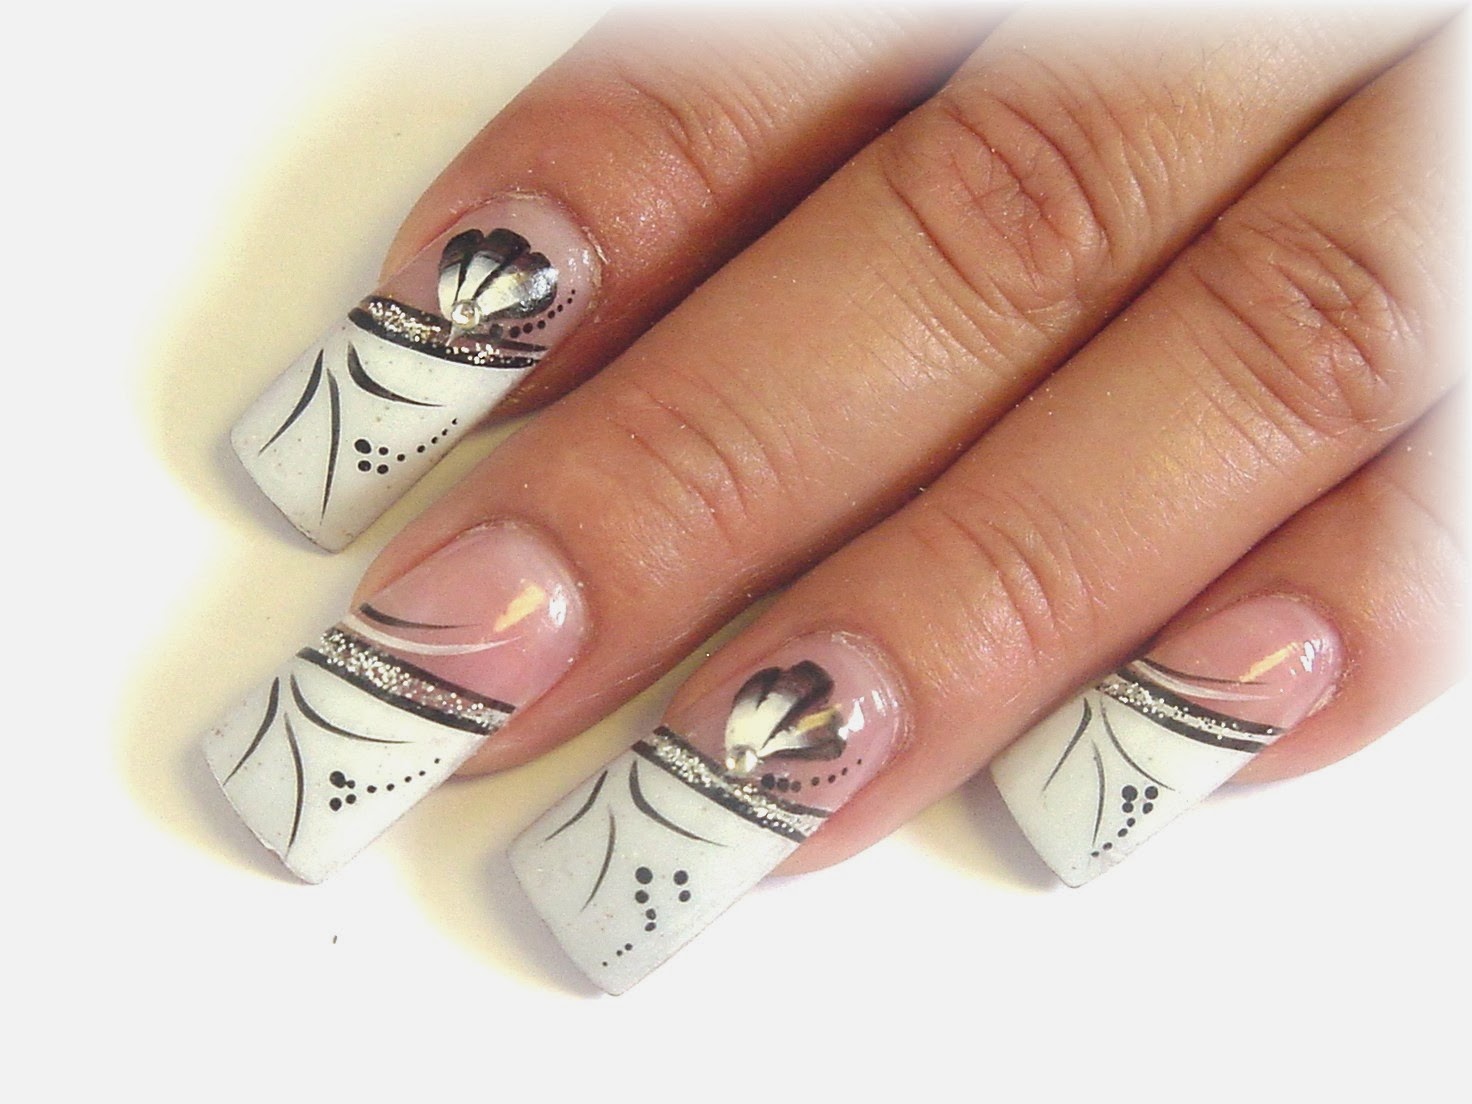 2013 Glossy French Nail Art Designs For Women